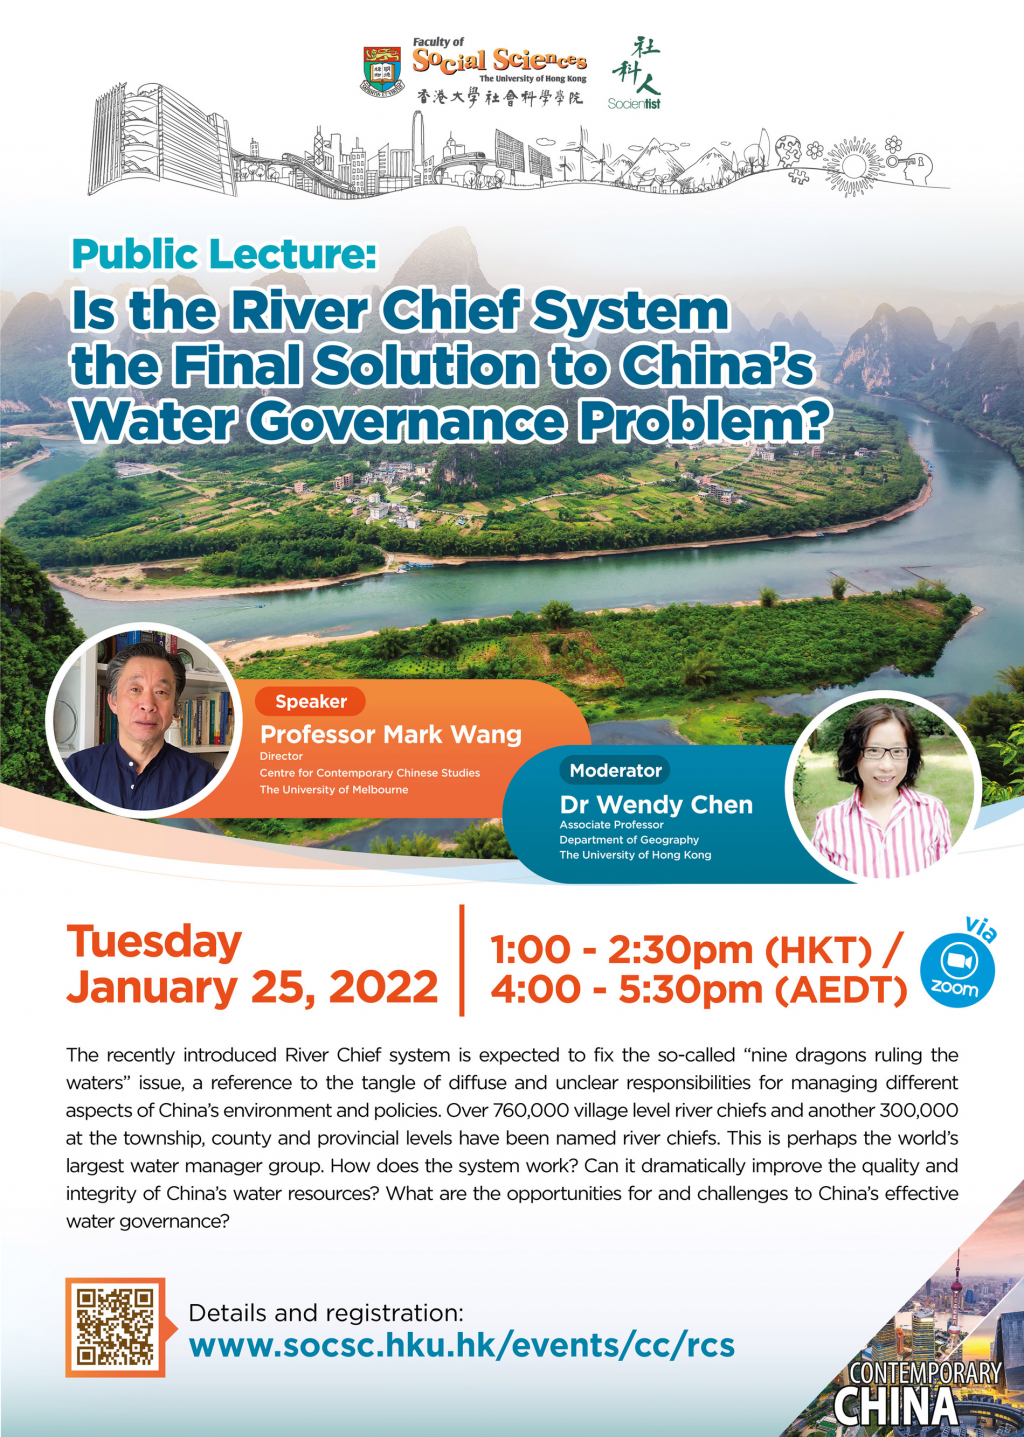 Contemporary China Research Cluster Public Lecture: Is the River Chief System the Final Solution to China's Water Governance Problem?